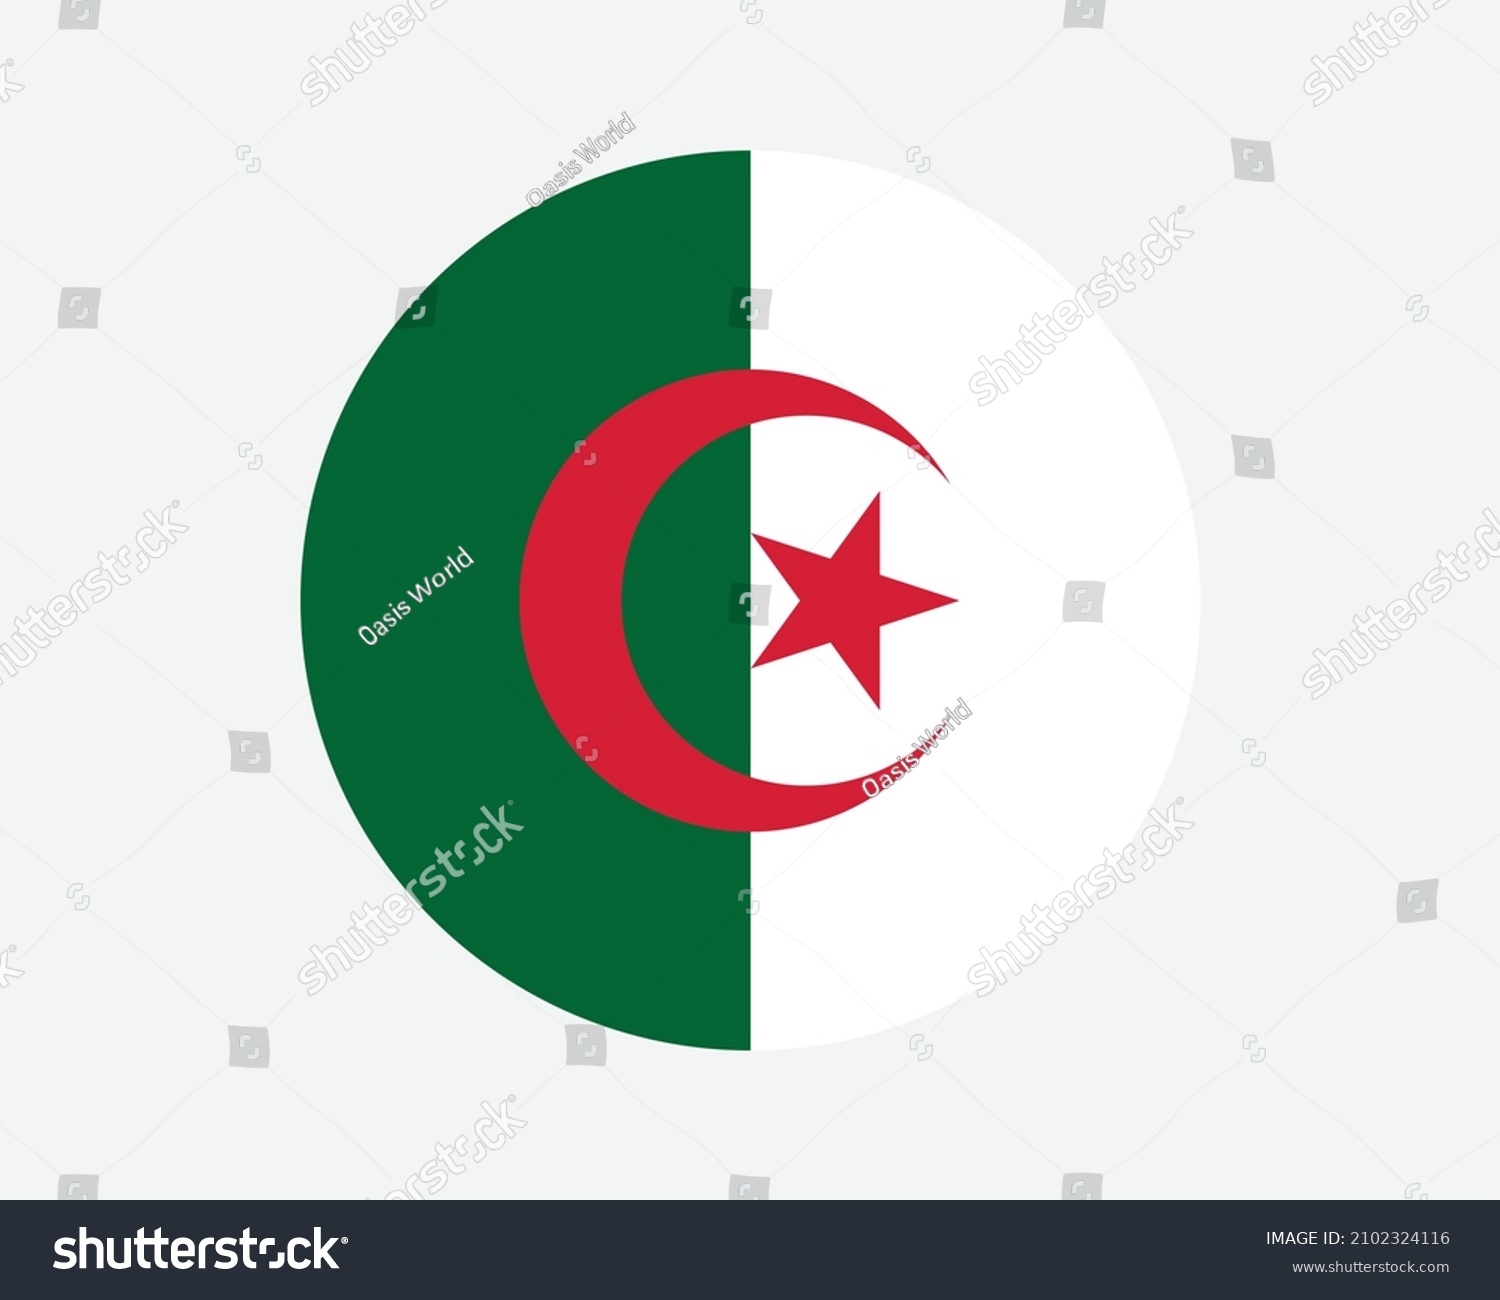 SVG of Algeria Round Country Flag. Circular Algerian National Flag. People's Democratic Republic of Algeria Circle Shape Button Banner. EPS Vector Illustration. svg